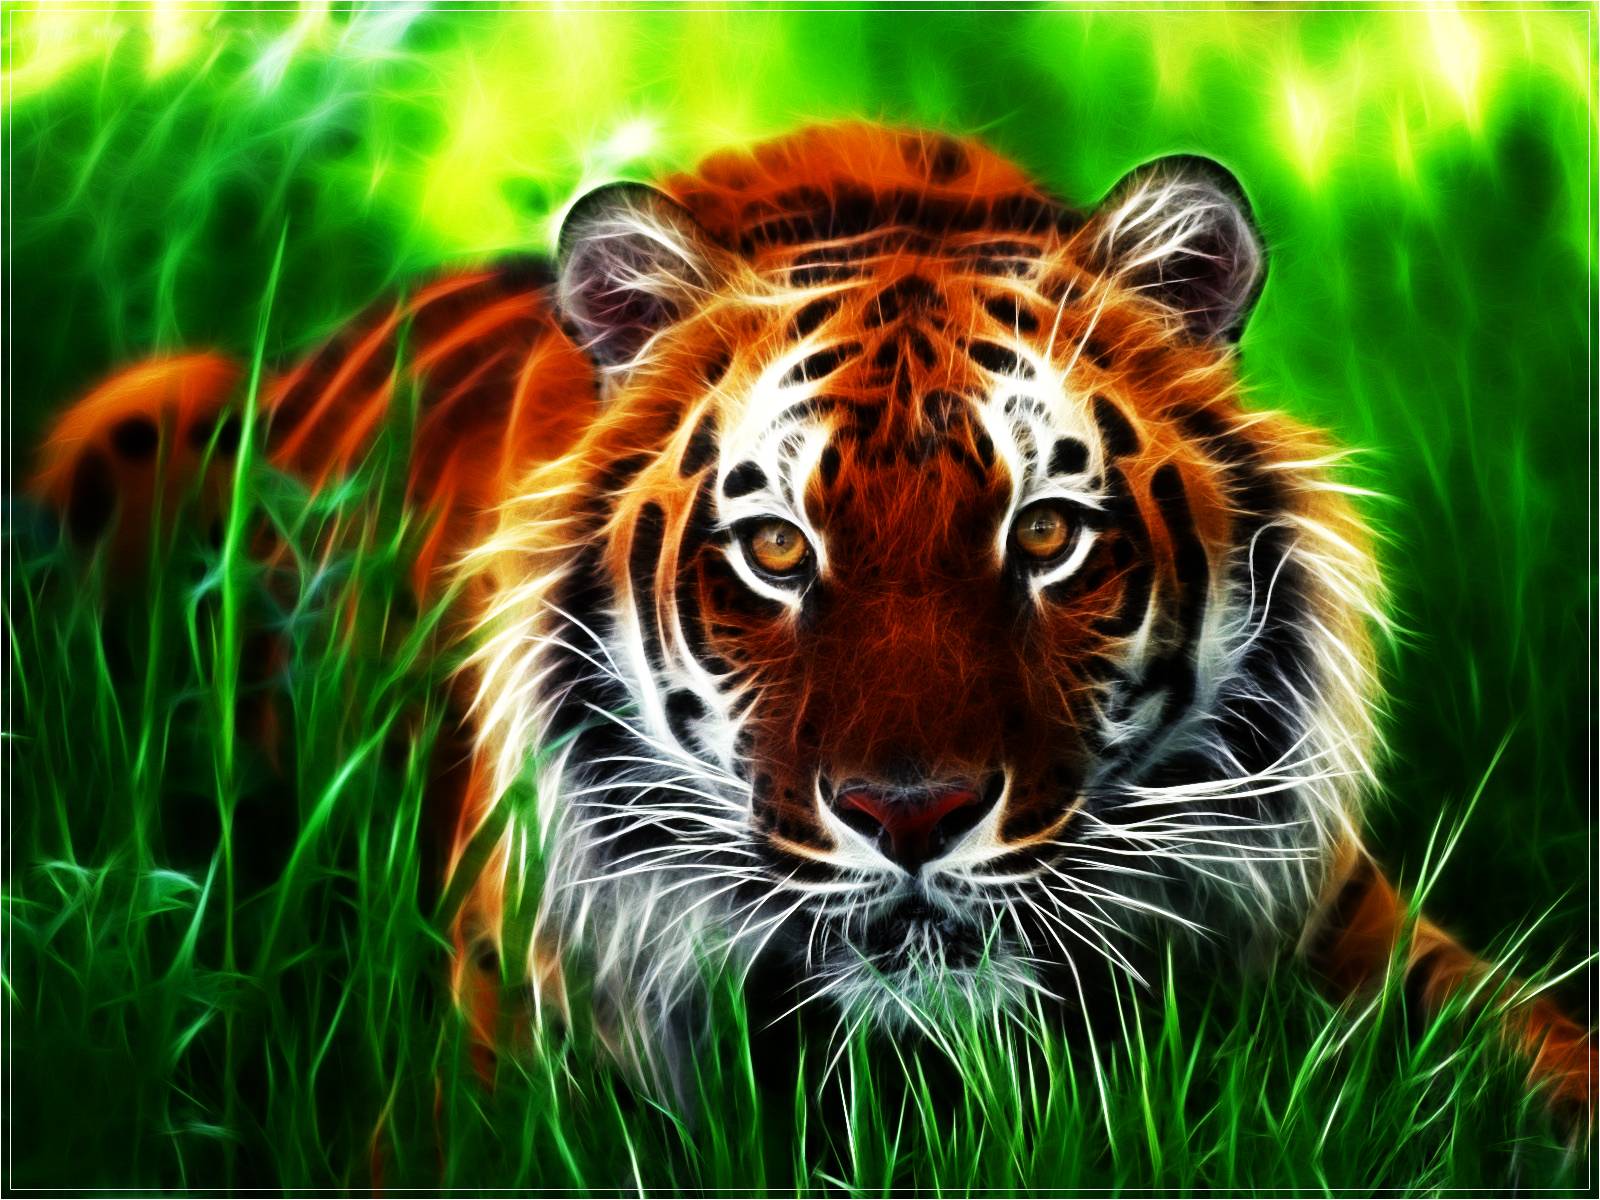 A selection of 10 Image of Tigers in HD quality